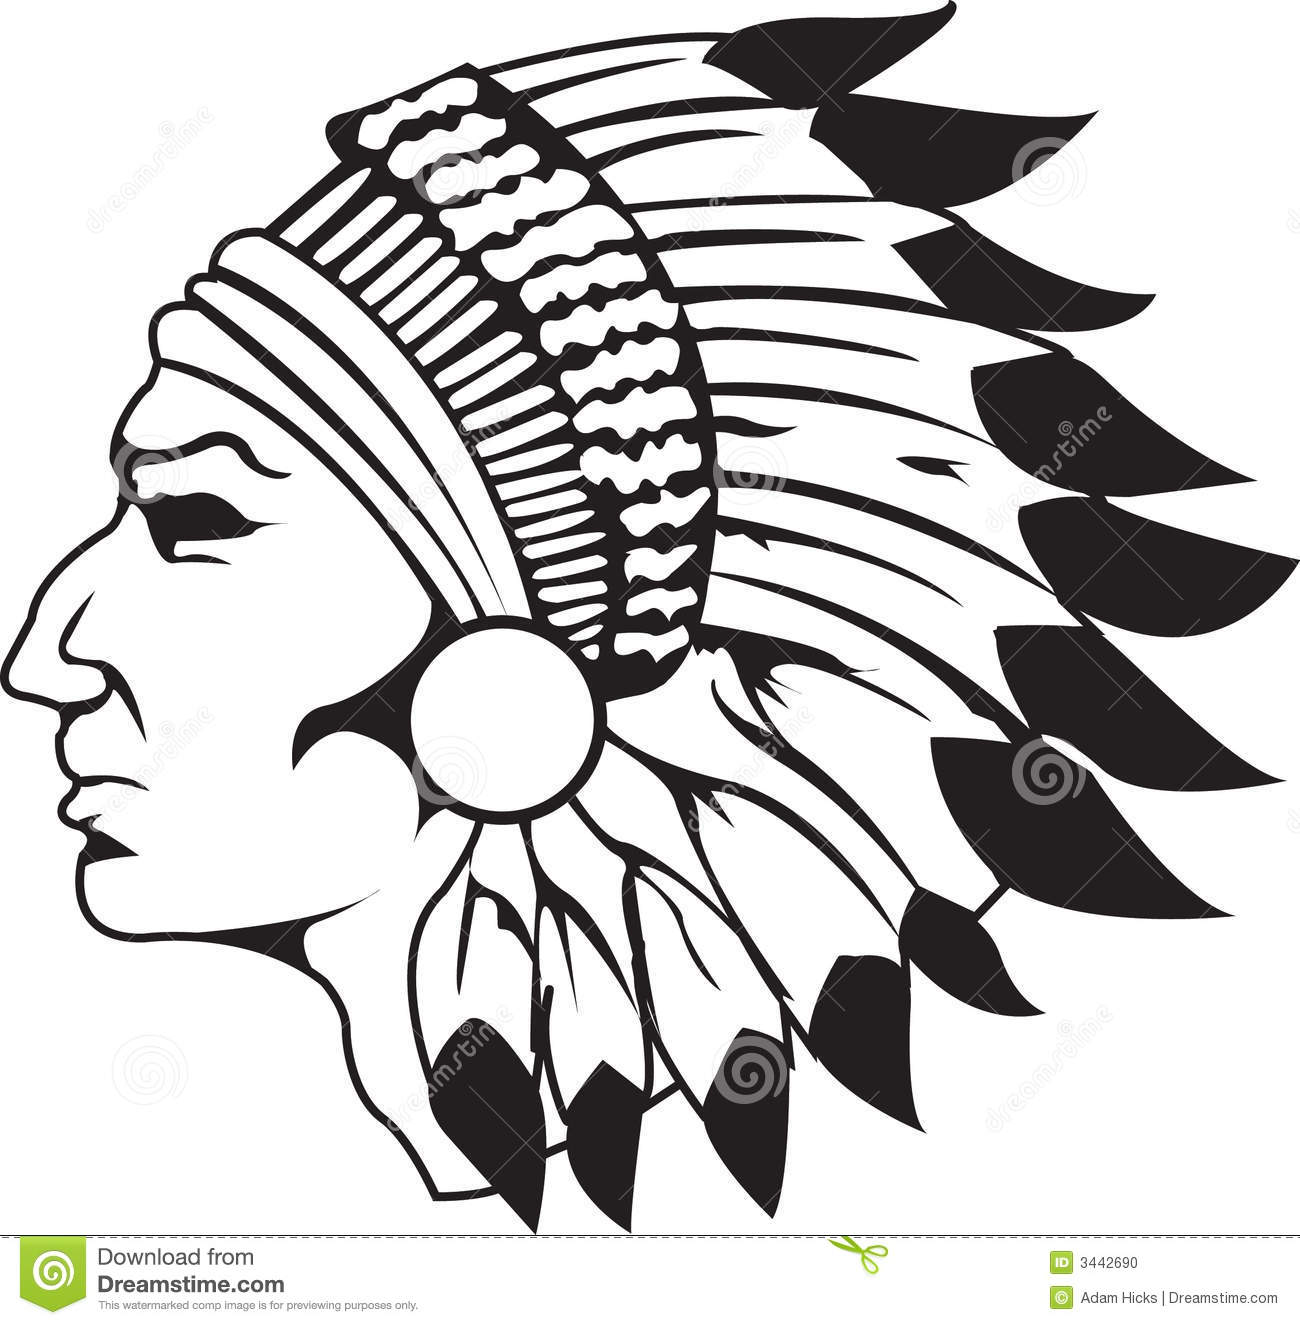 Indian Chief Black And White Stock Photo   Image  3442690